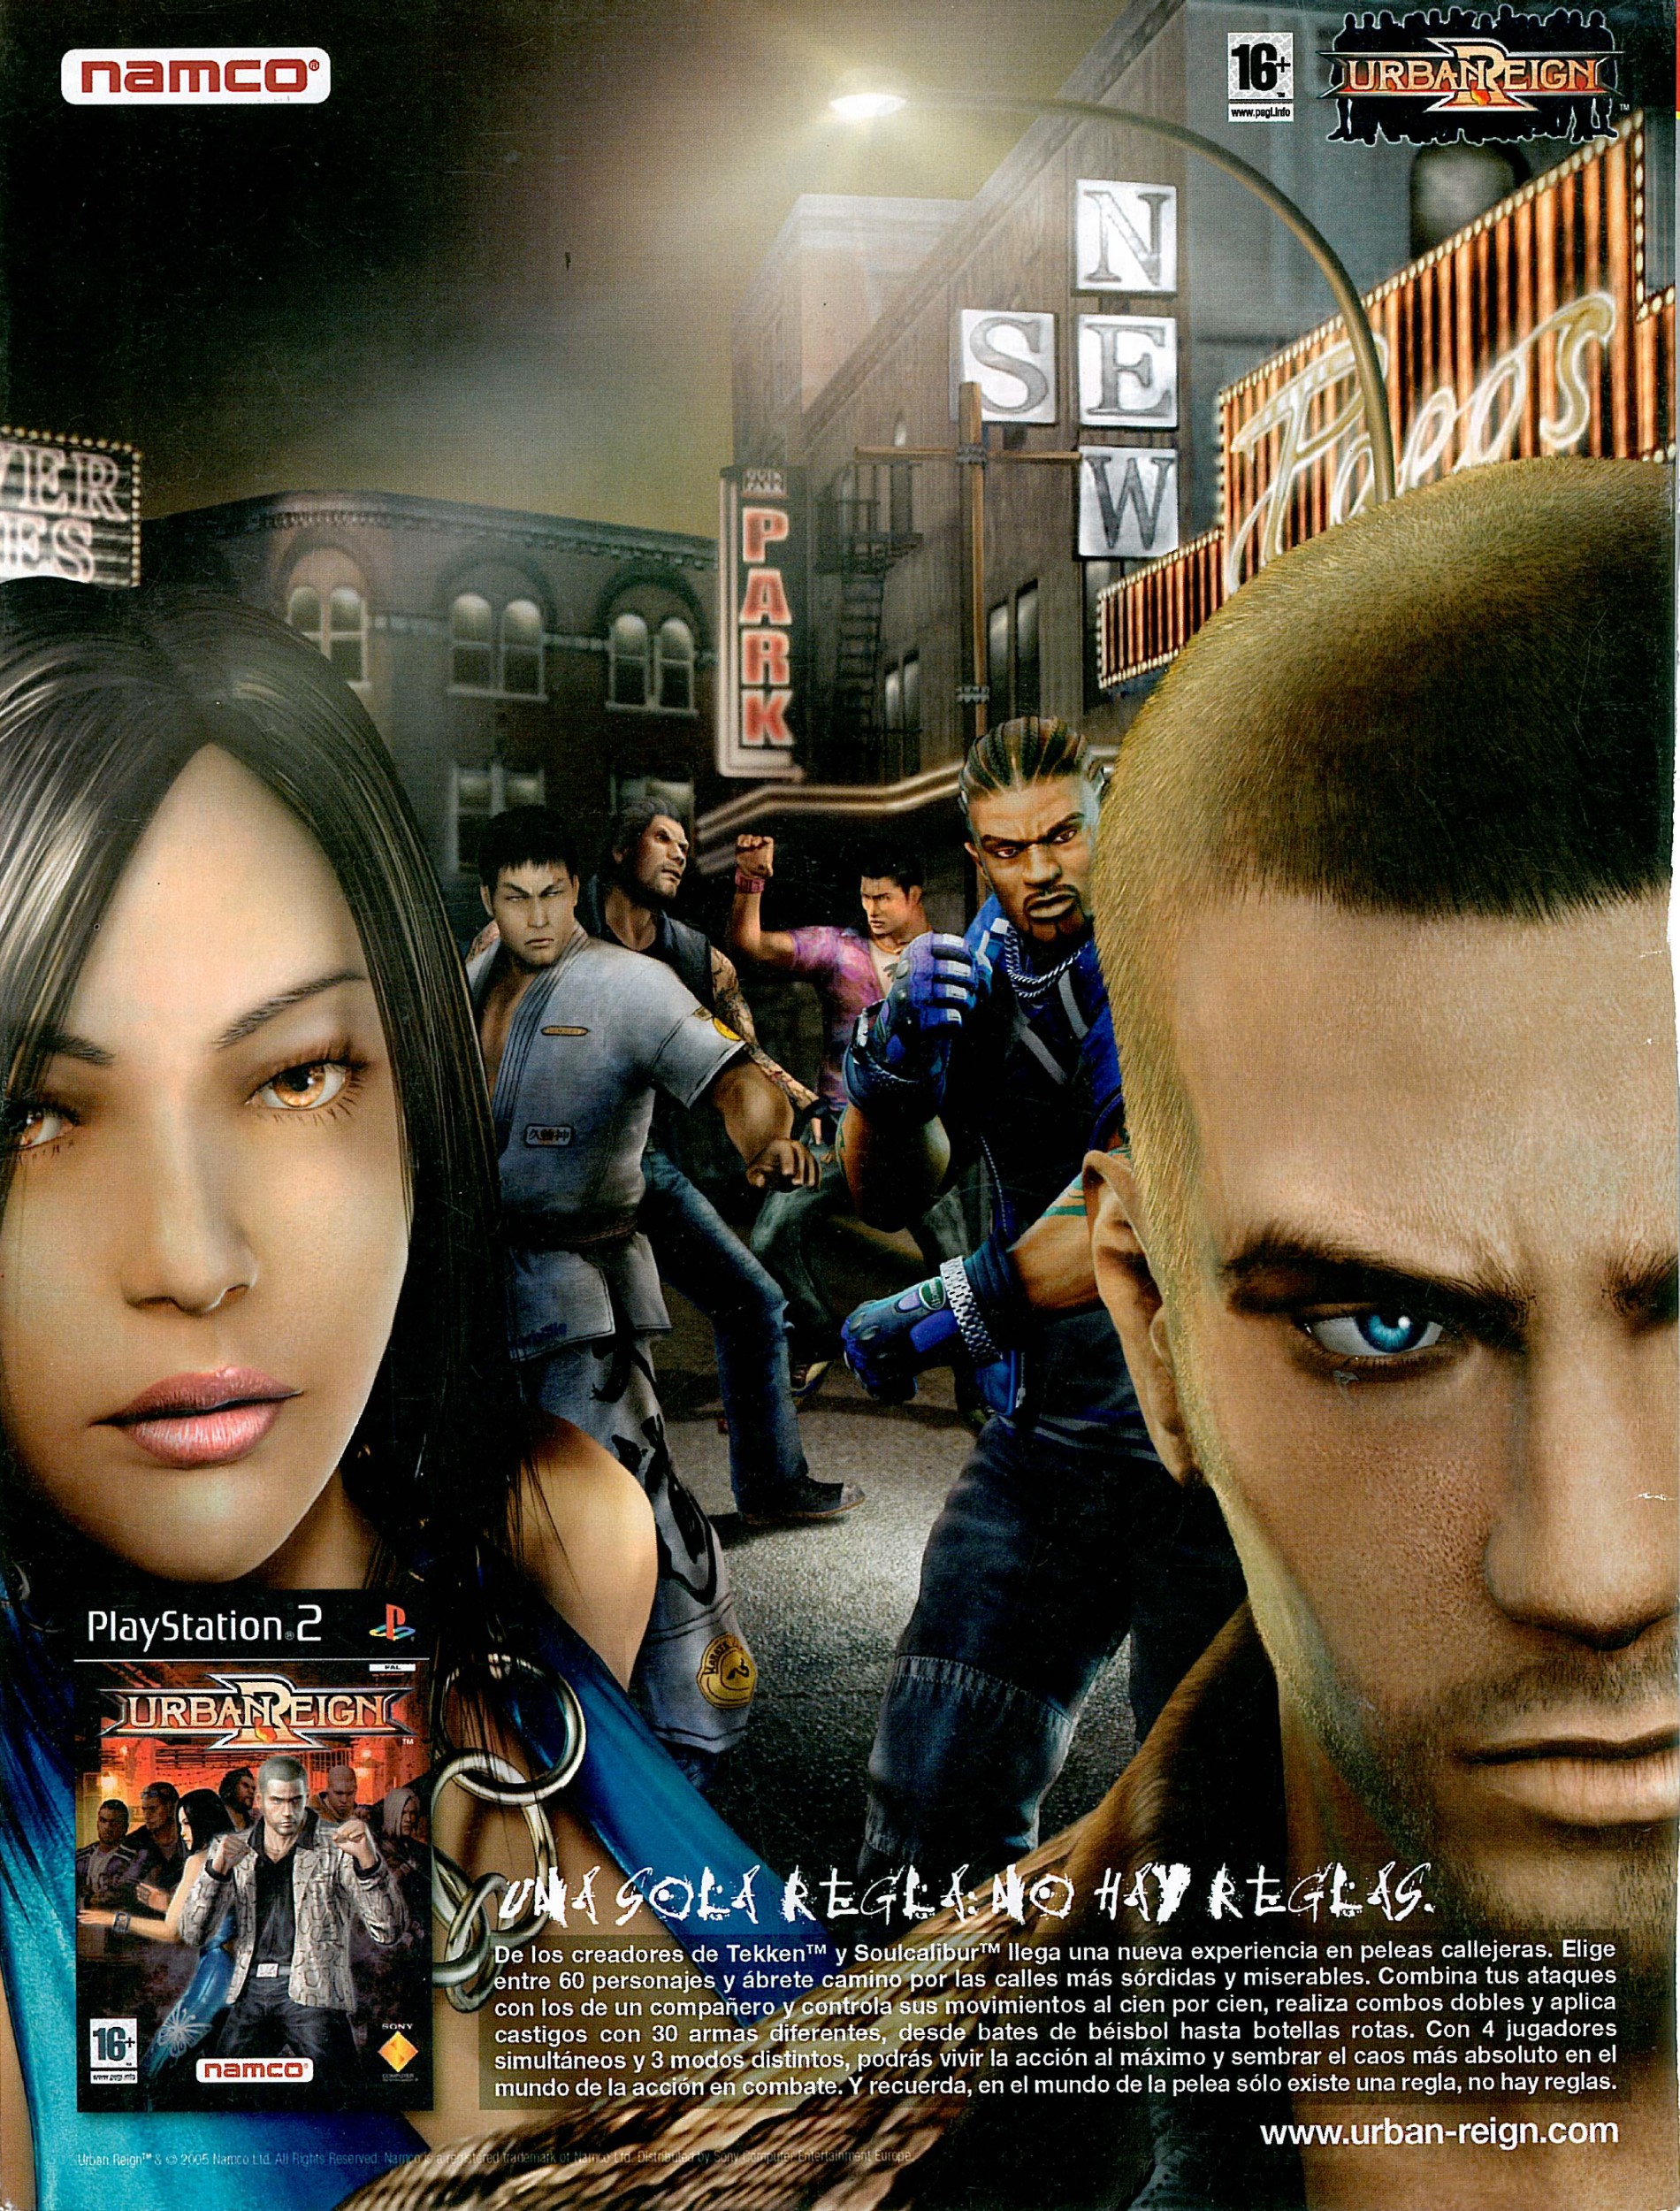 urban reign ps2 save file